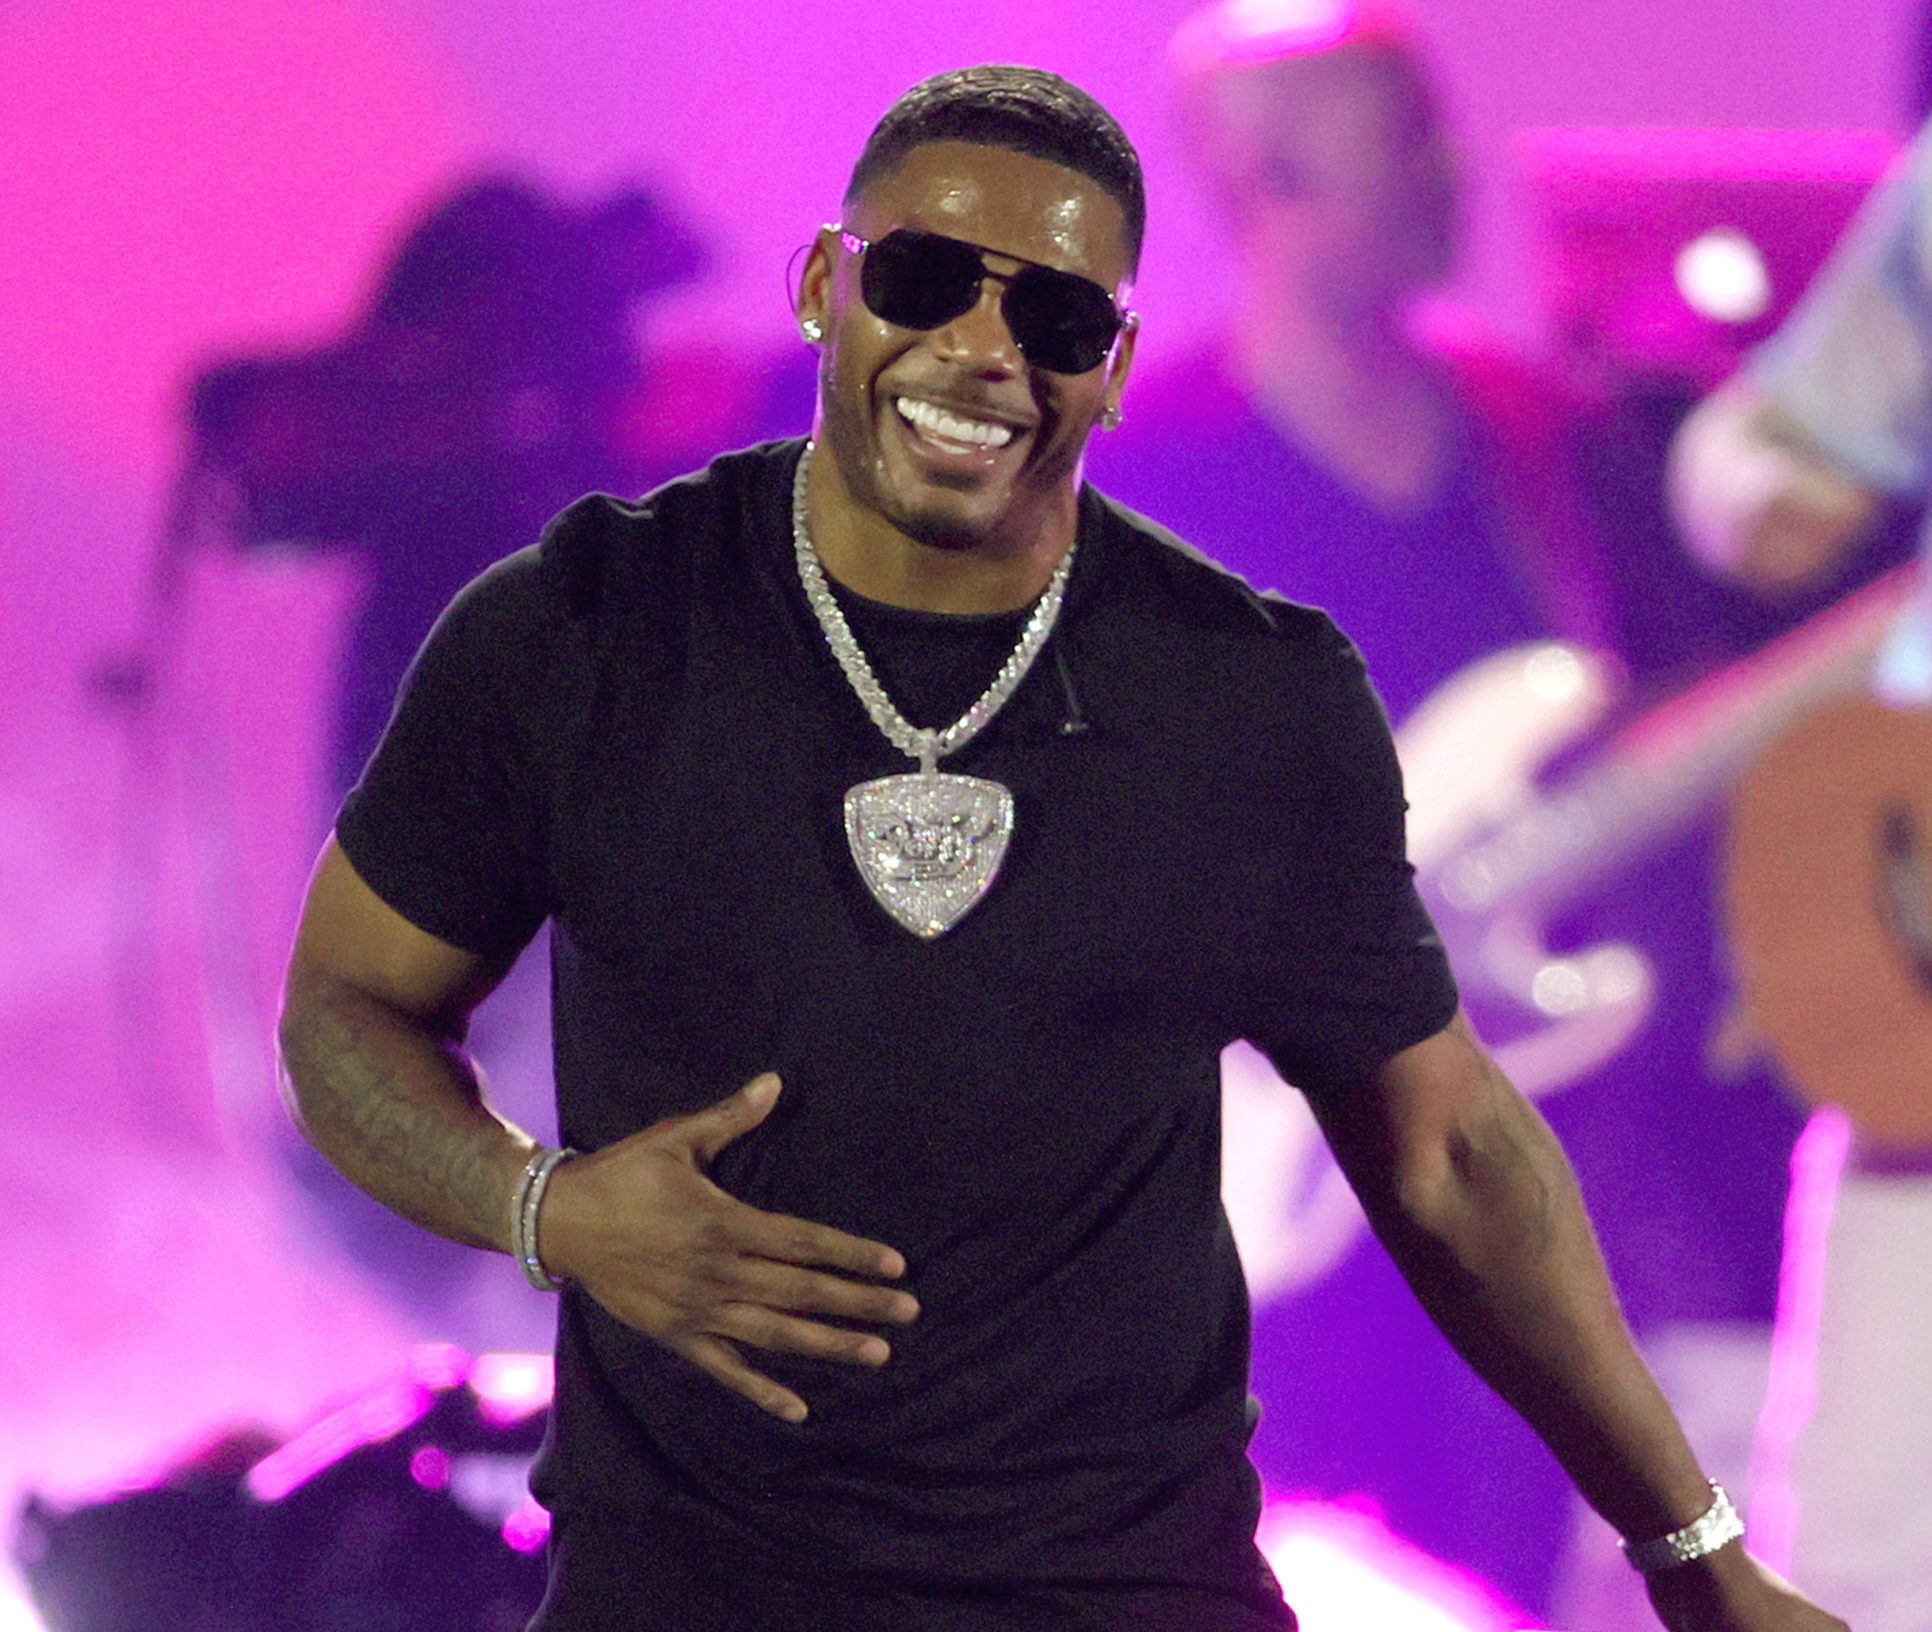 Nelly is set to get the "I Am Hip-Hop Award" at the 2021 BET Hip Hop Awards for all of his accomplishments throughout his career.